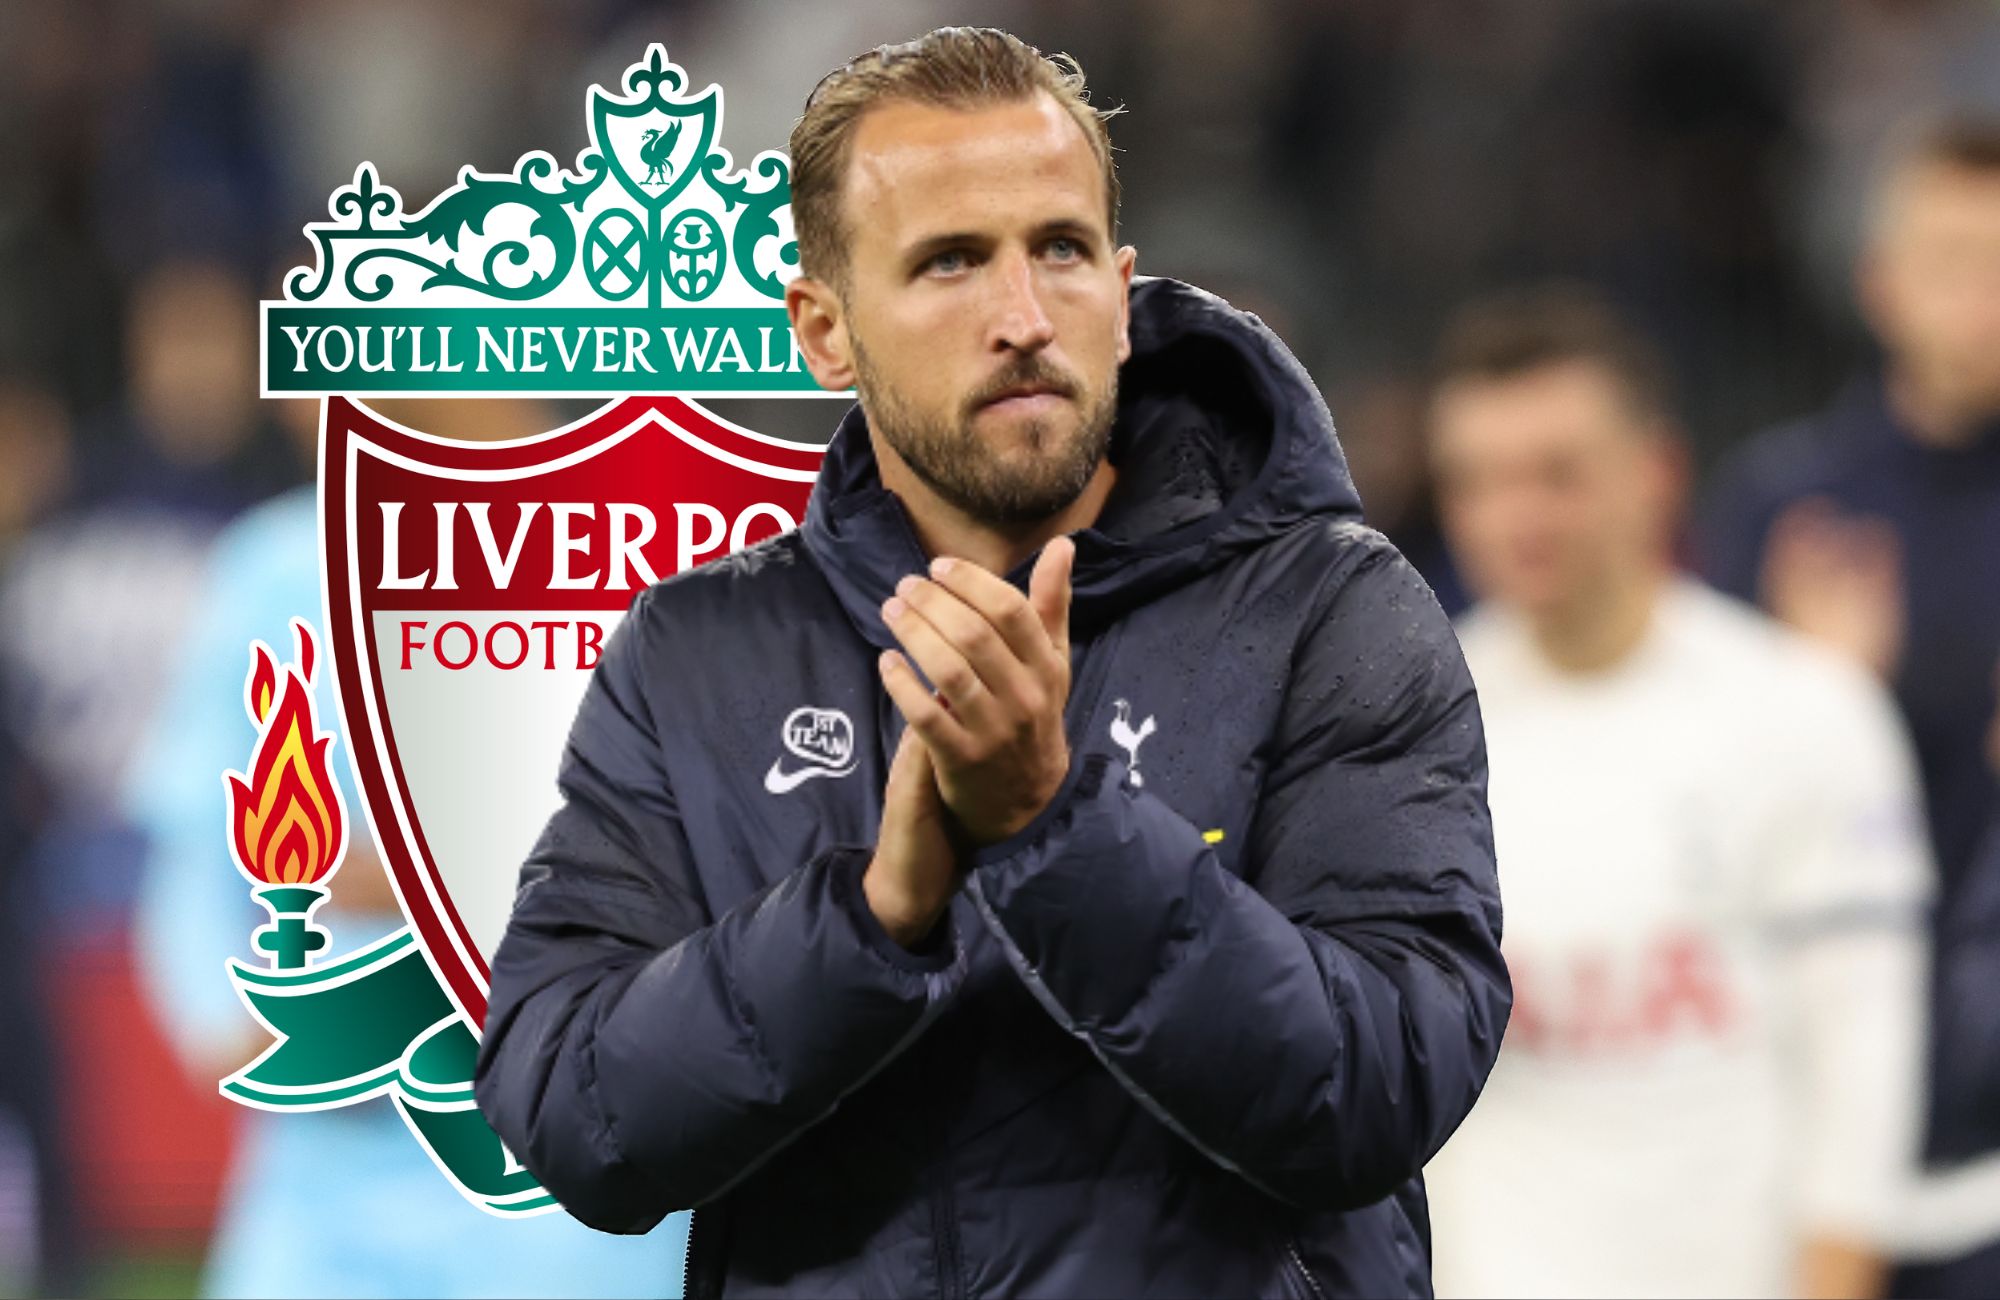 Harry Kane may have saved Liverpool's midfield transfer search